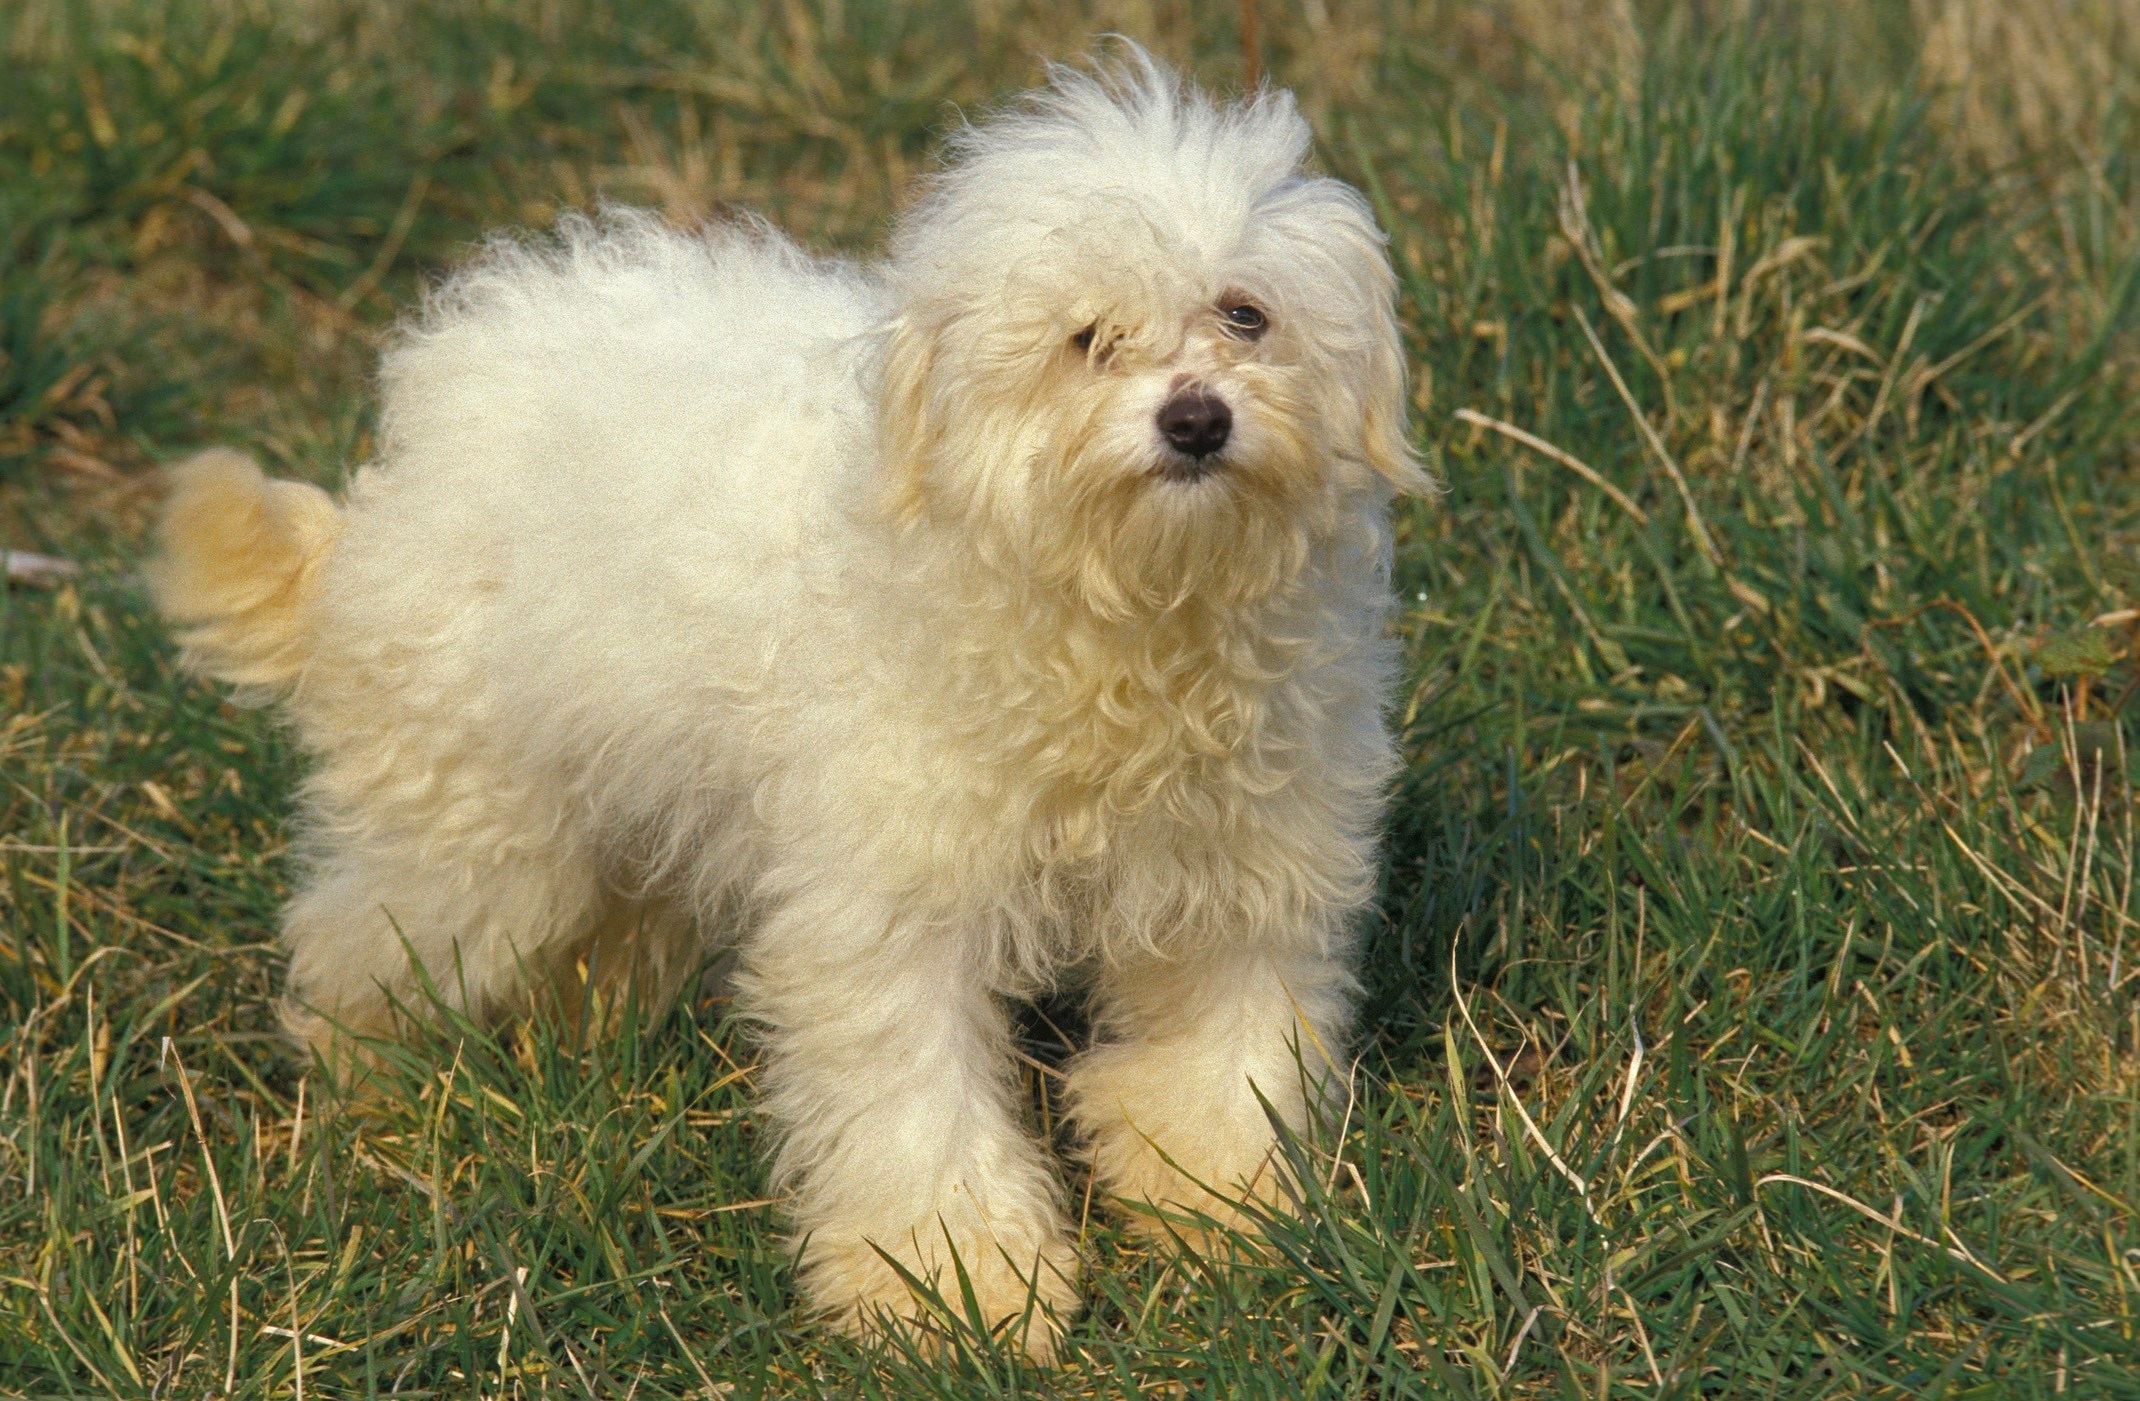 scraggly white bolognese dog with disheveled fur standing in grass